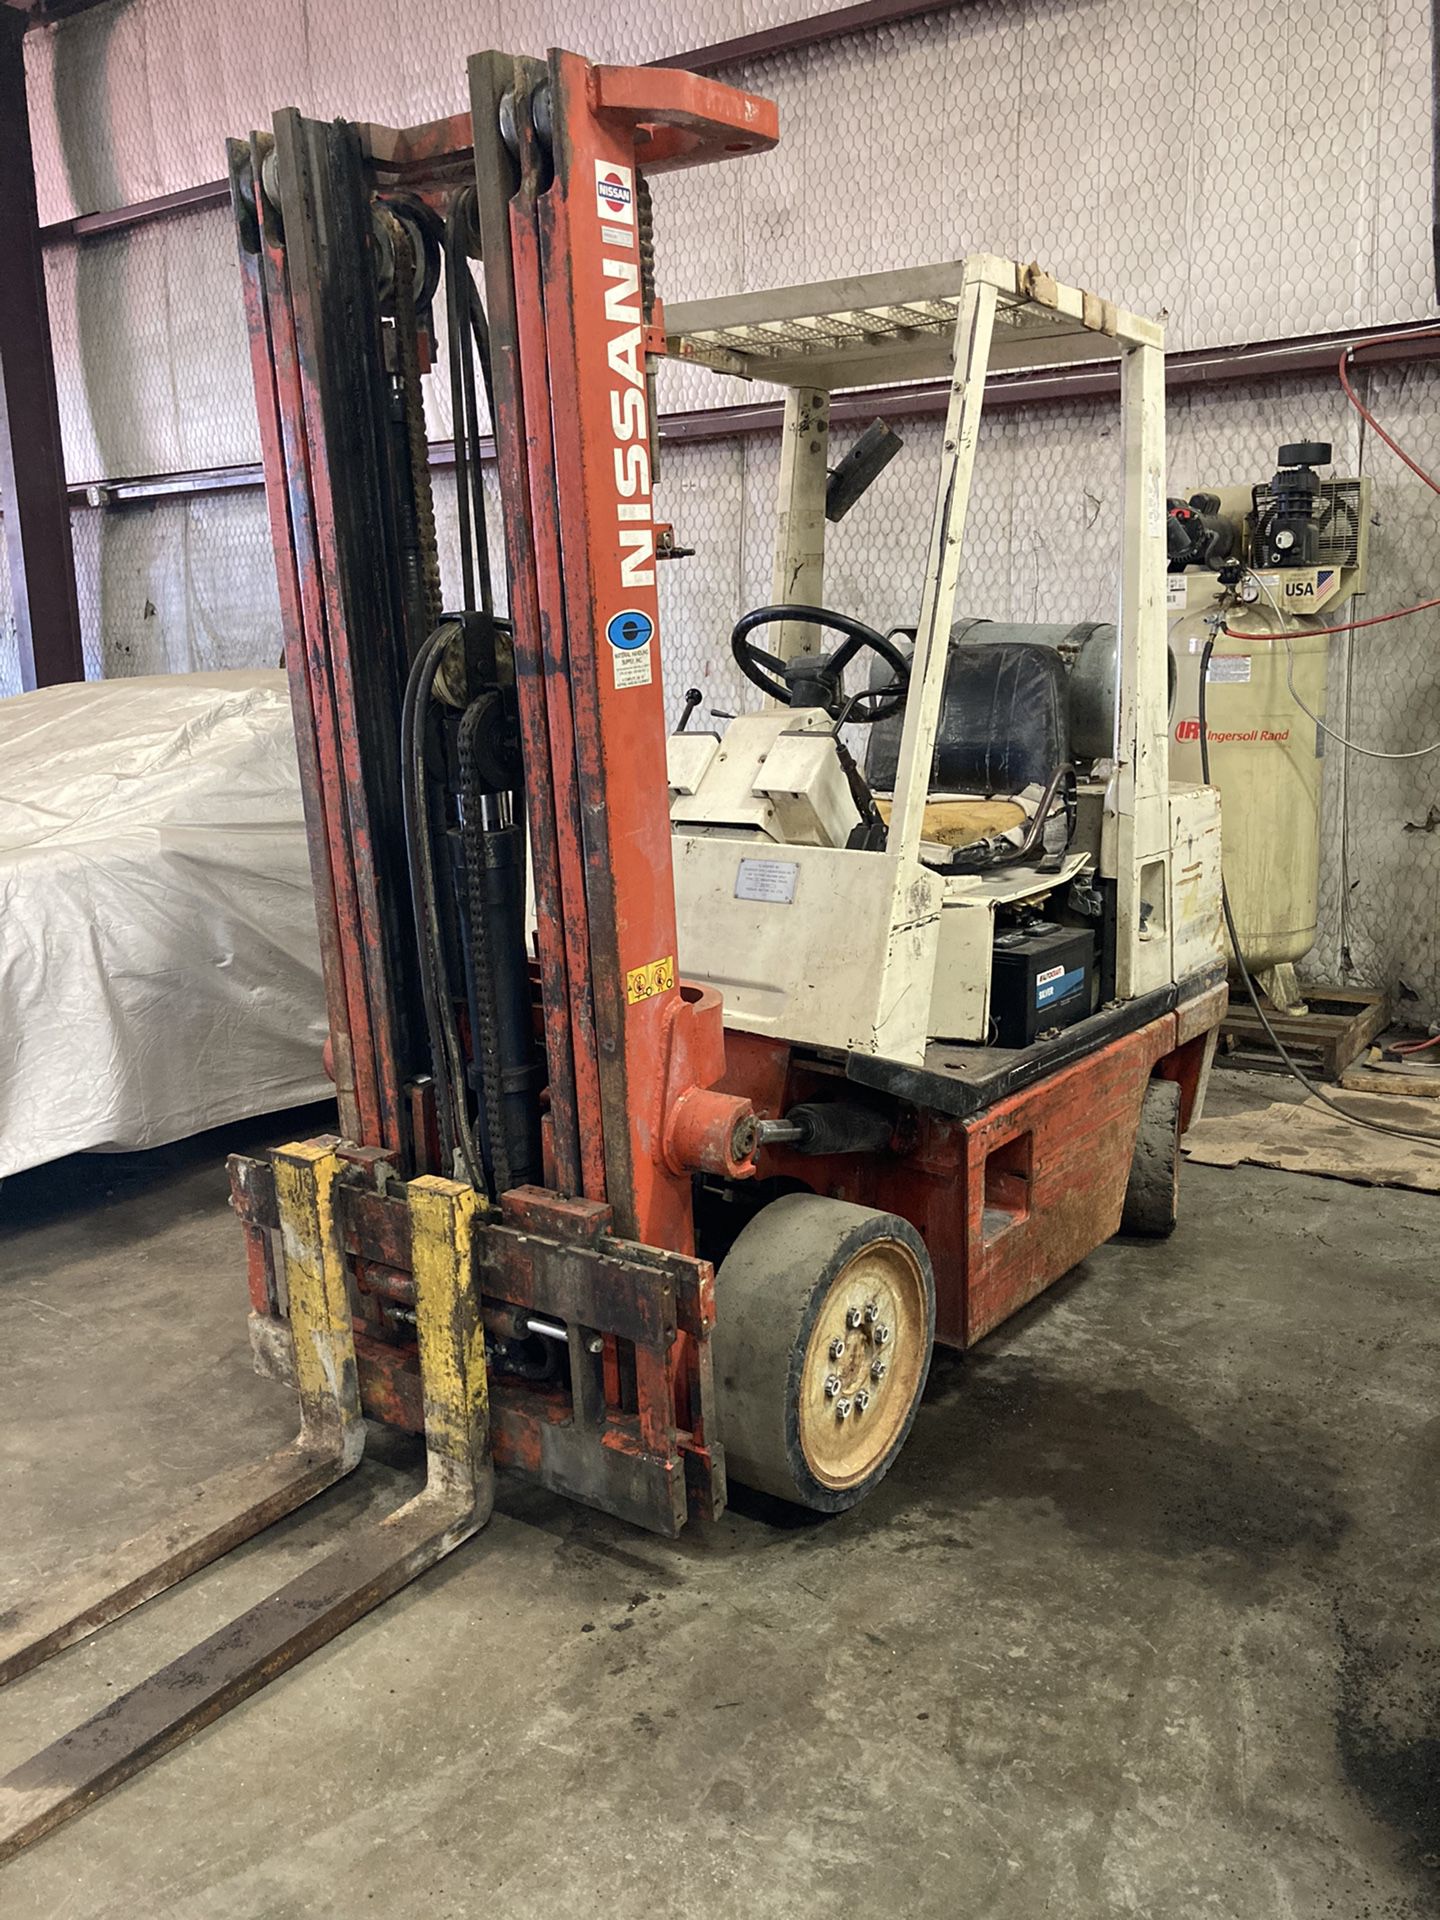 Nissan forklift 5000 lbs capacity